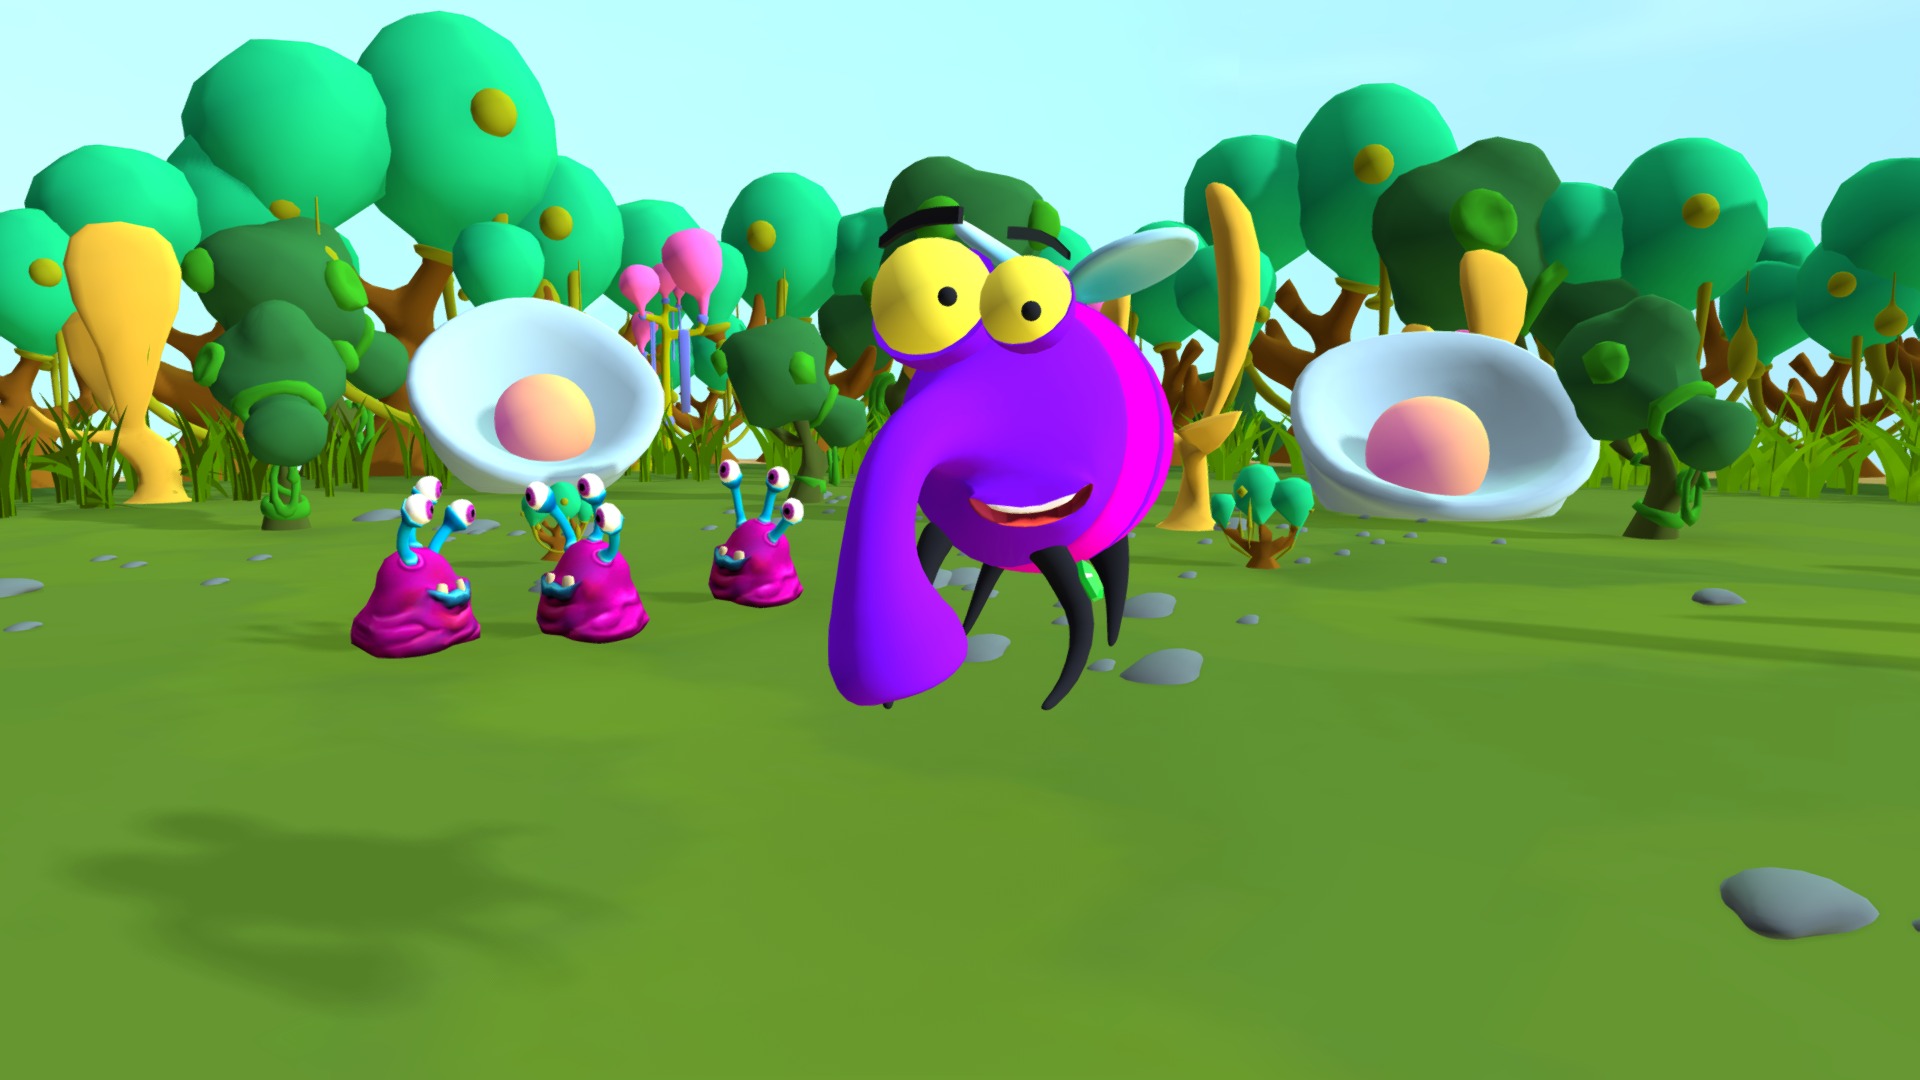 3D model Educational Vaccine VR game (click for Audio) - This is a 3D model of the Educational Vaccine VR game (click for Audio). The 3D model is about a cartoon character with a group of balloons.